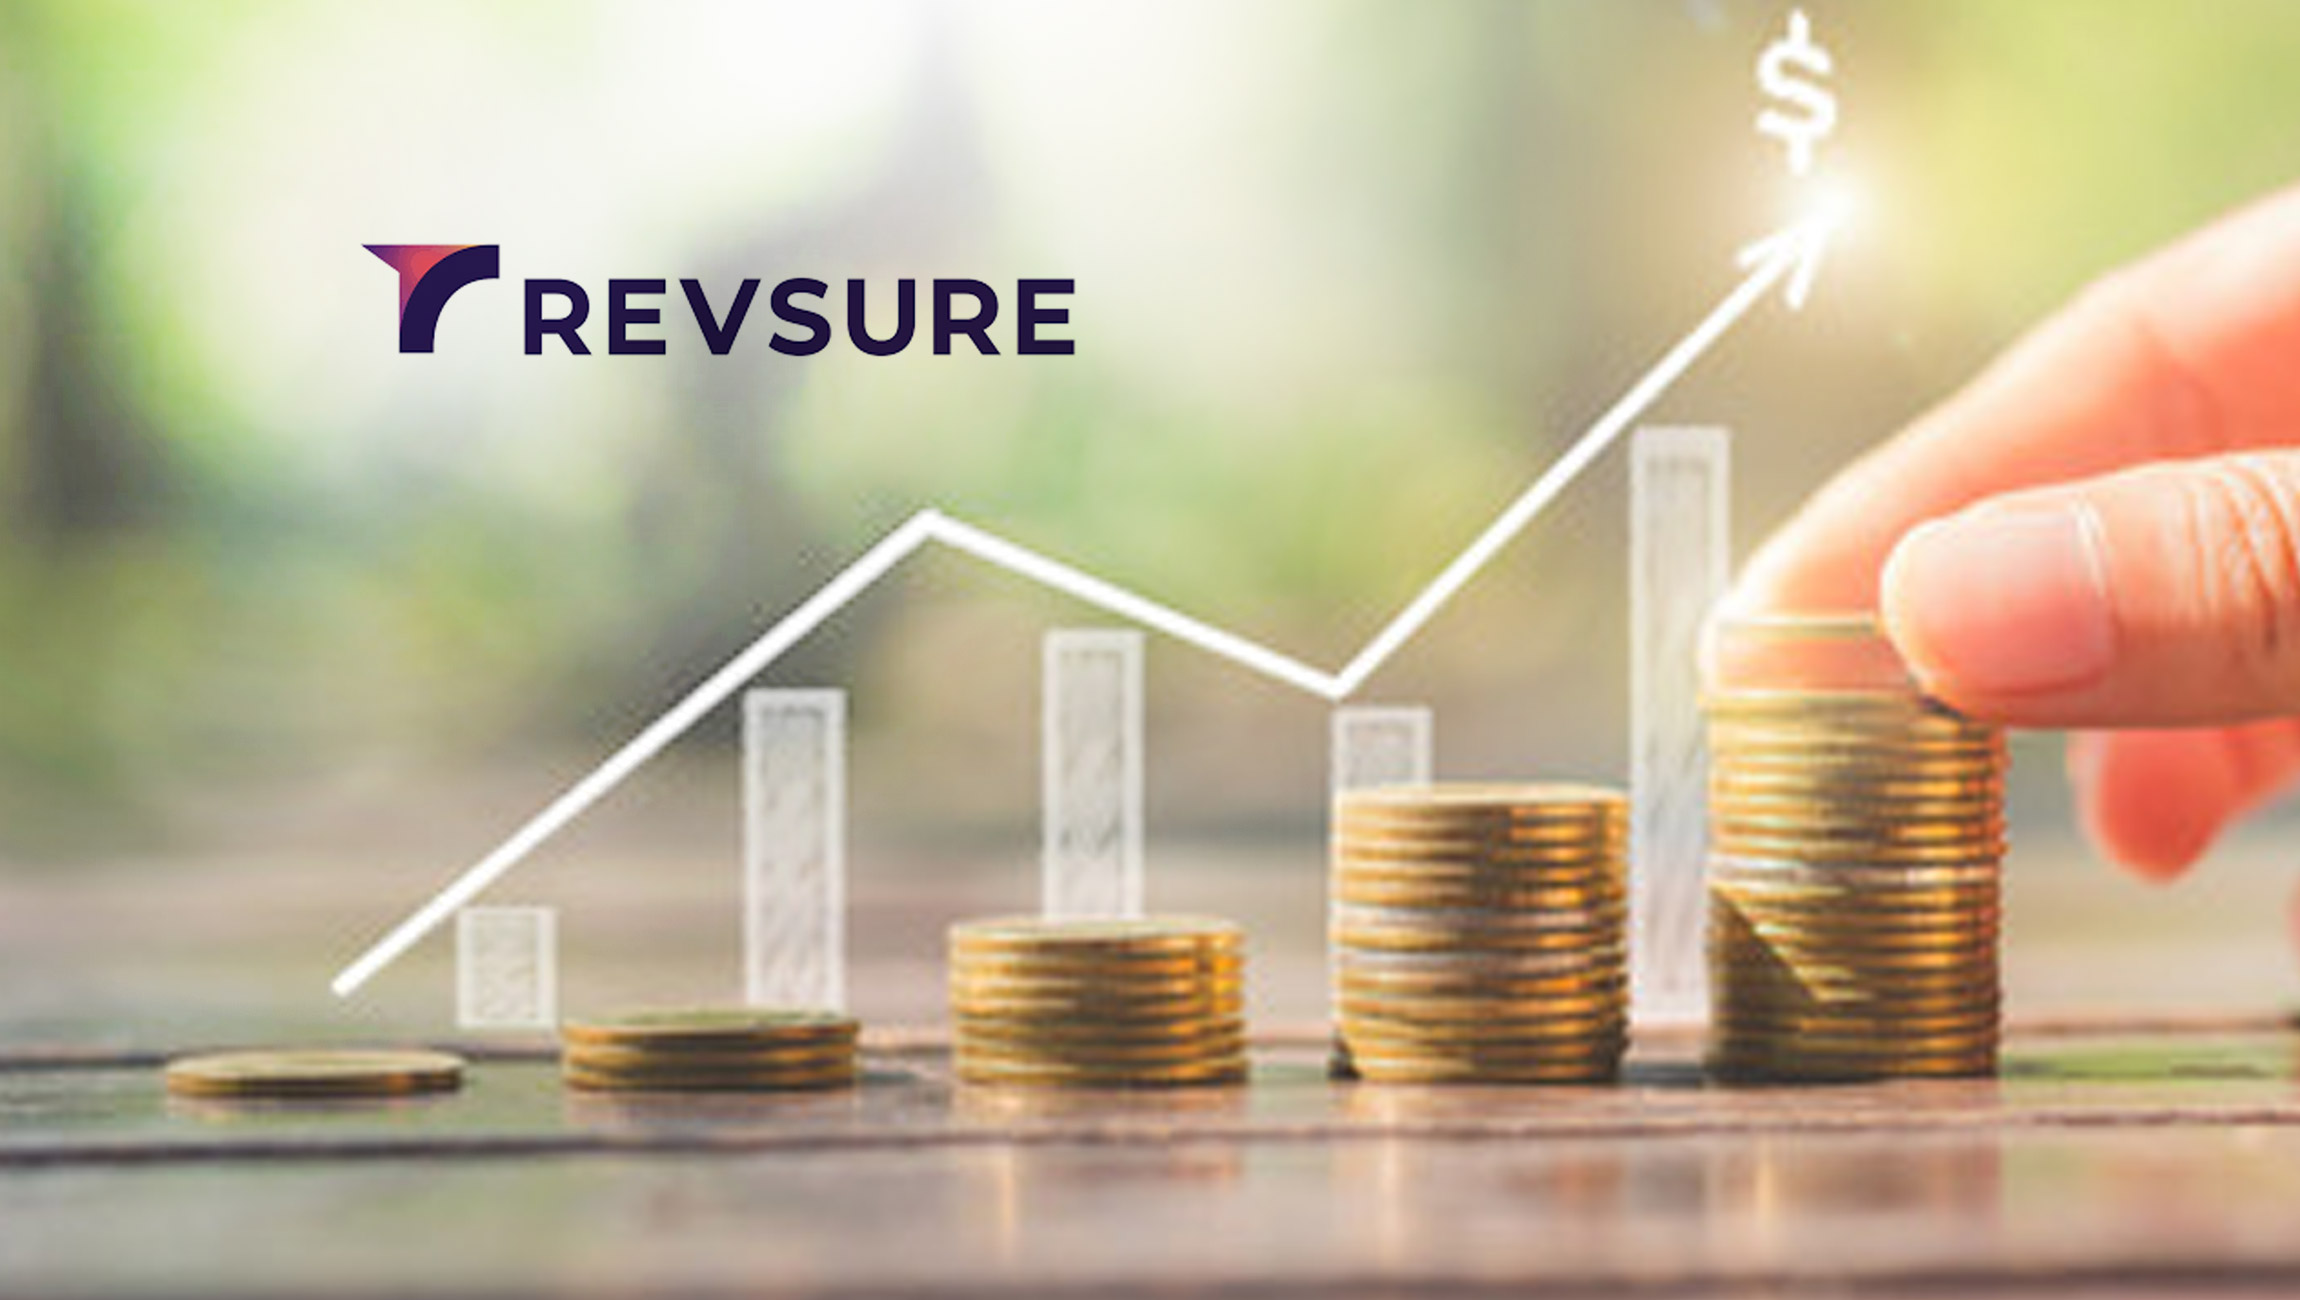 RevSure.AI Launches Sales Pipeline Readiness Solution to Help B2B’s Achieve Predictable Revenue Growth Amidst Economic Downturn